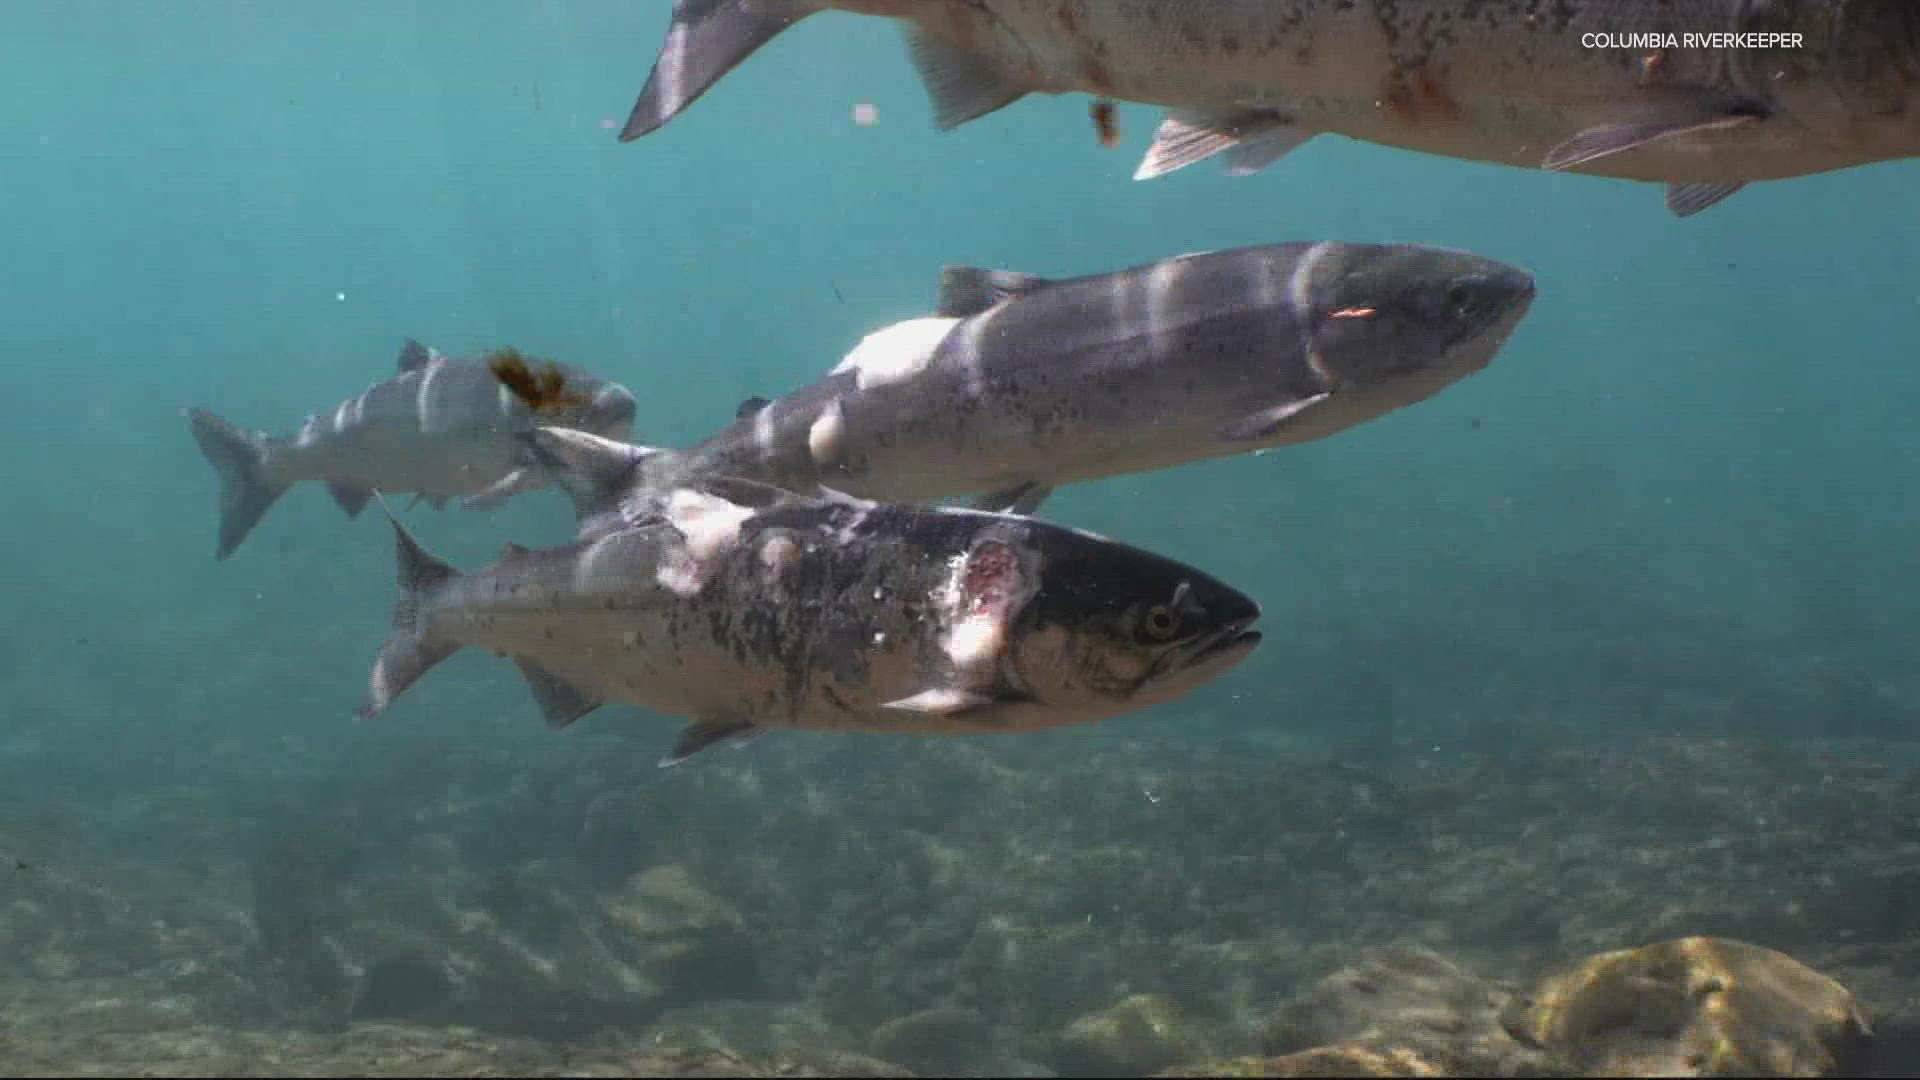 Salmon are suffering due to water temperatures that are too warm for them. Experts say if nothing is done it could spell extinction.